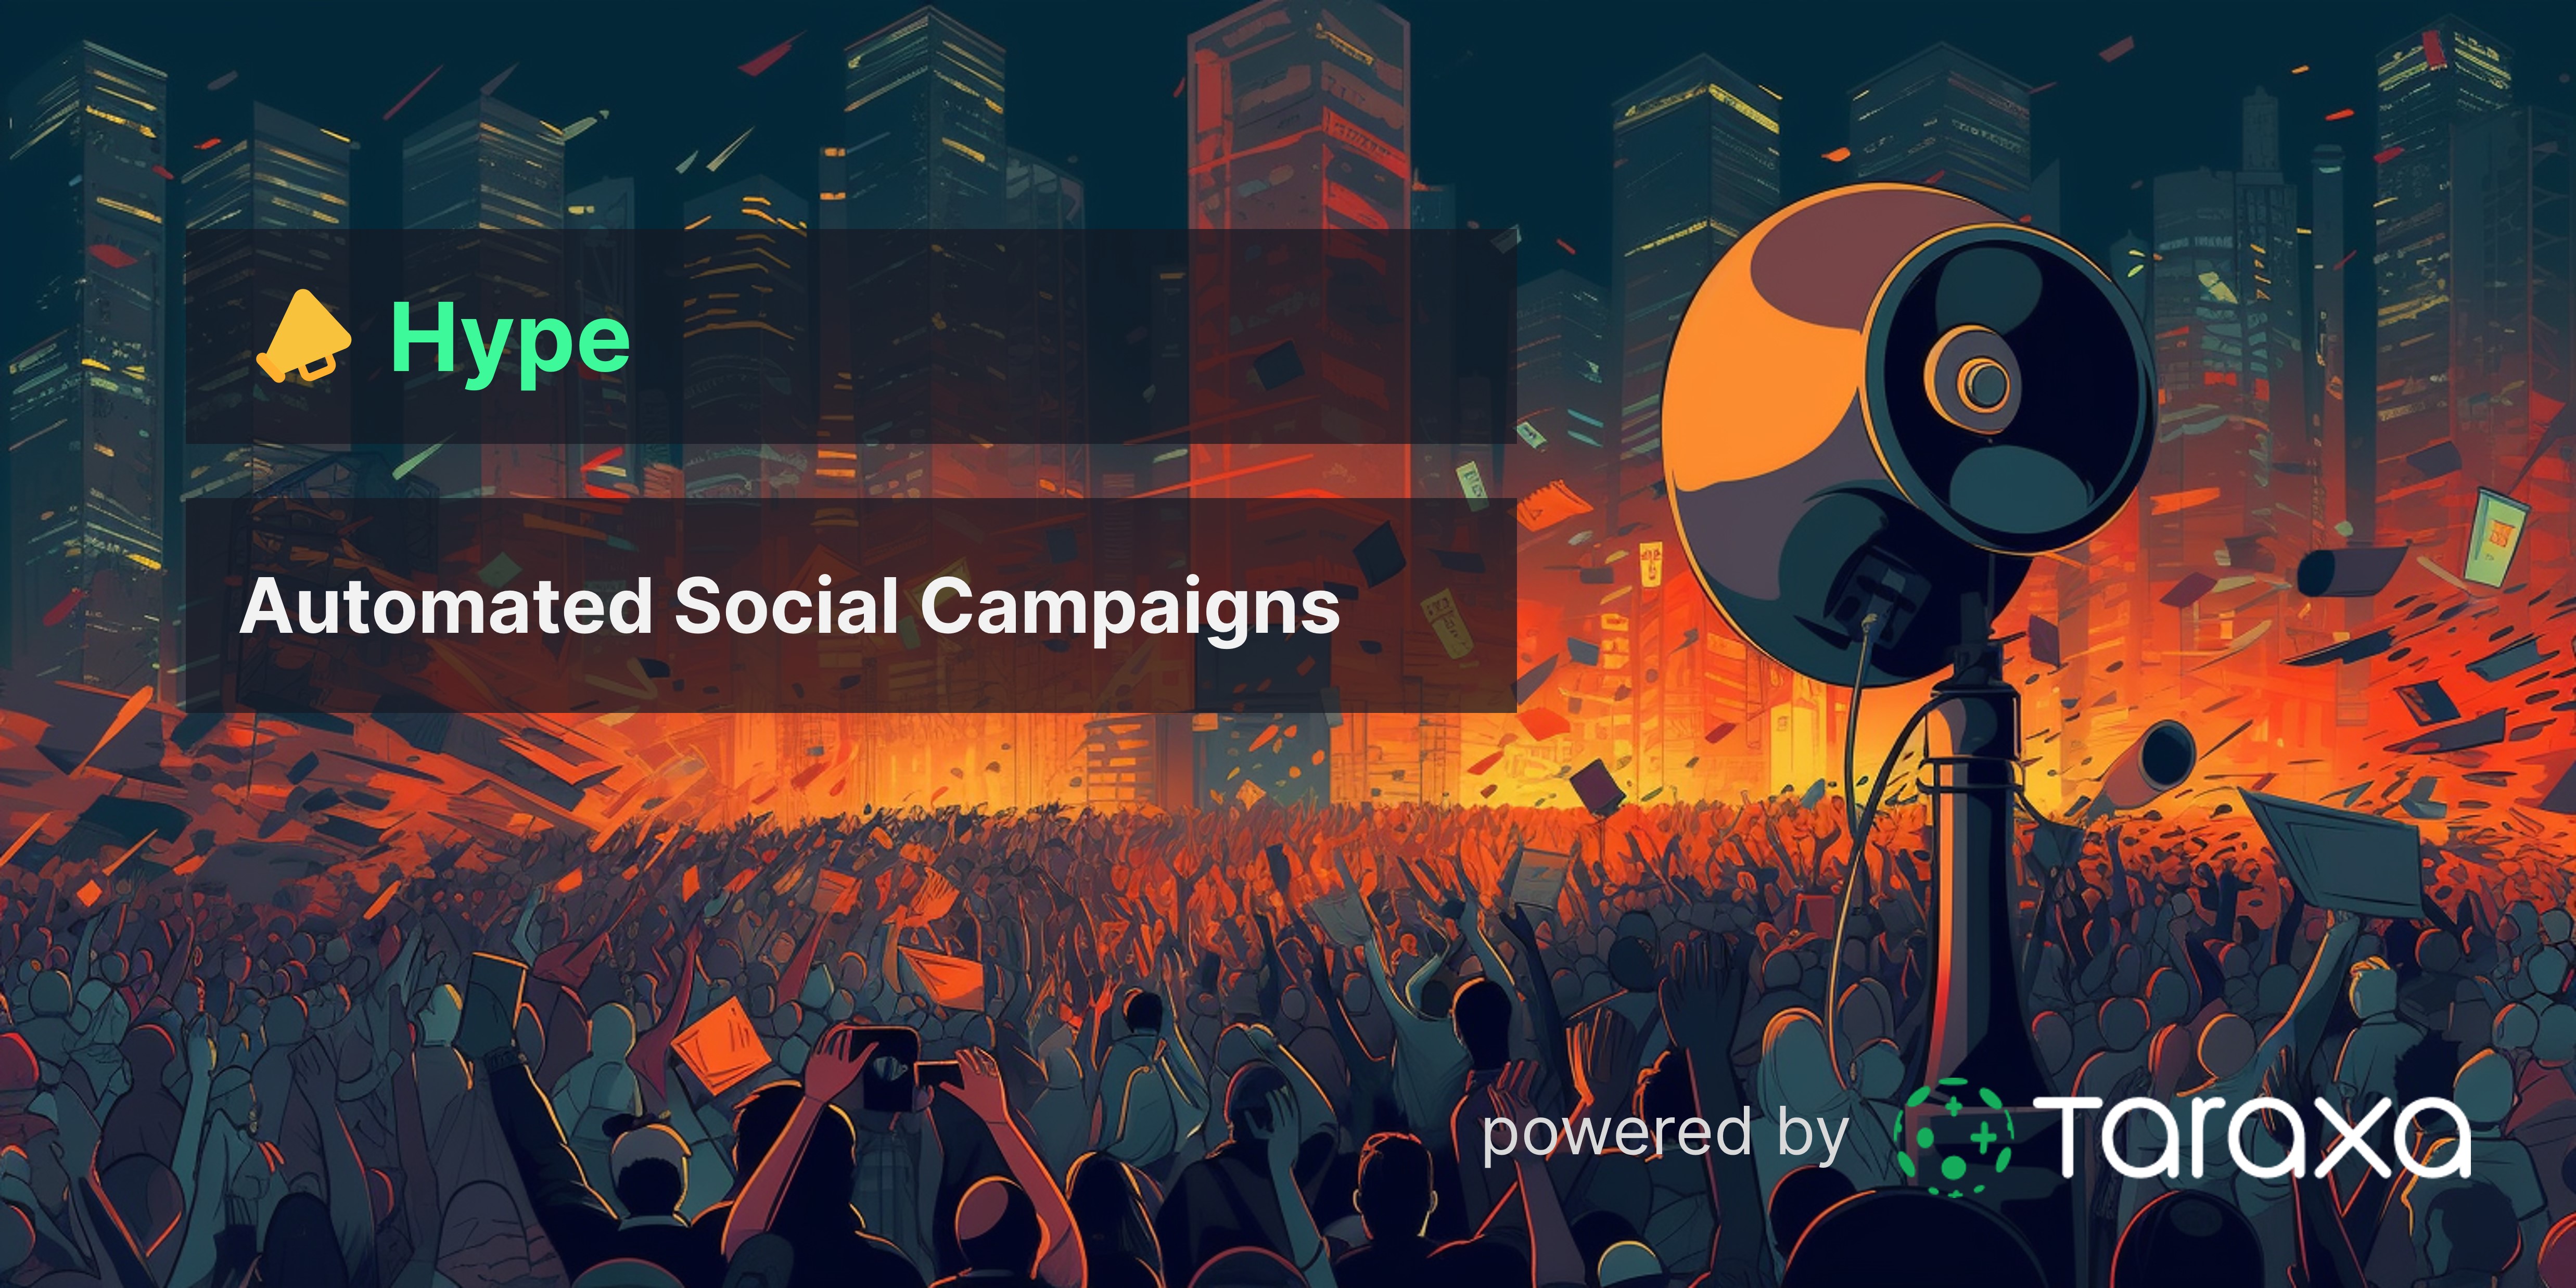 Hype - Automated Social Campaigns, powered by Taraxa